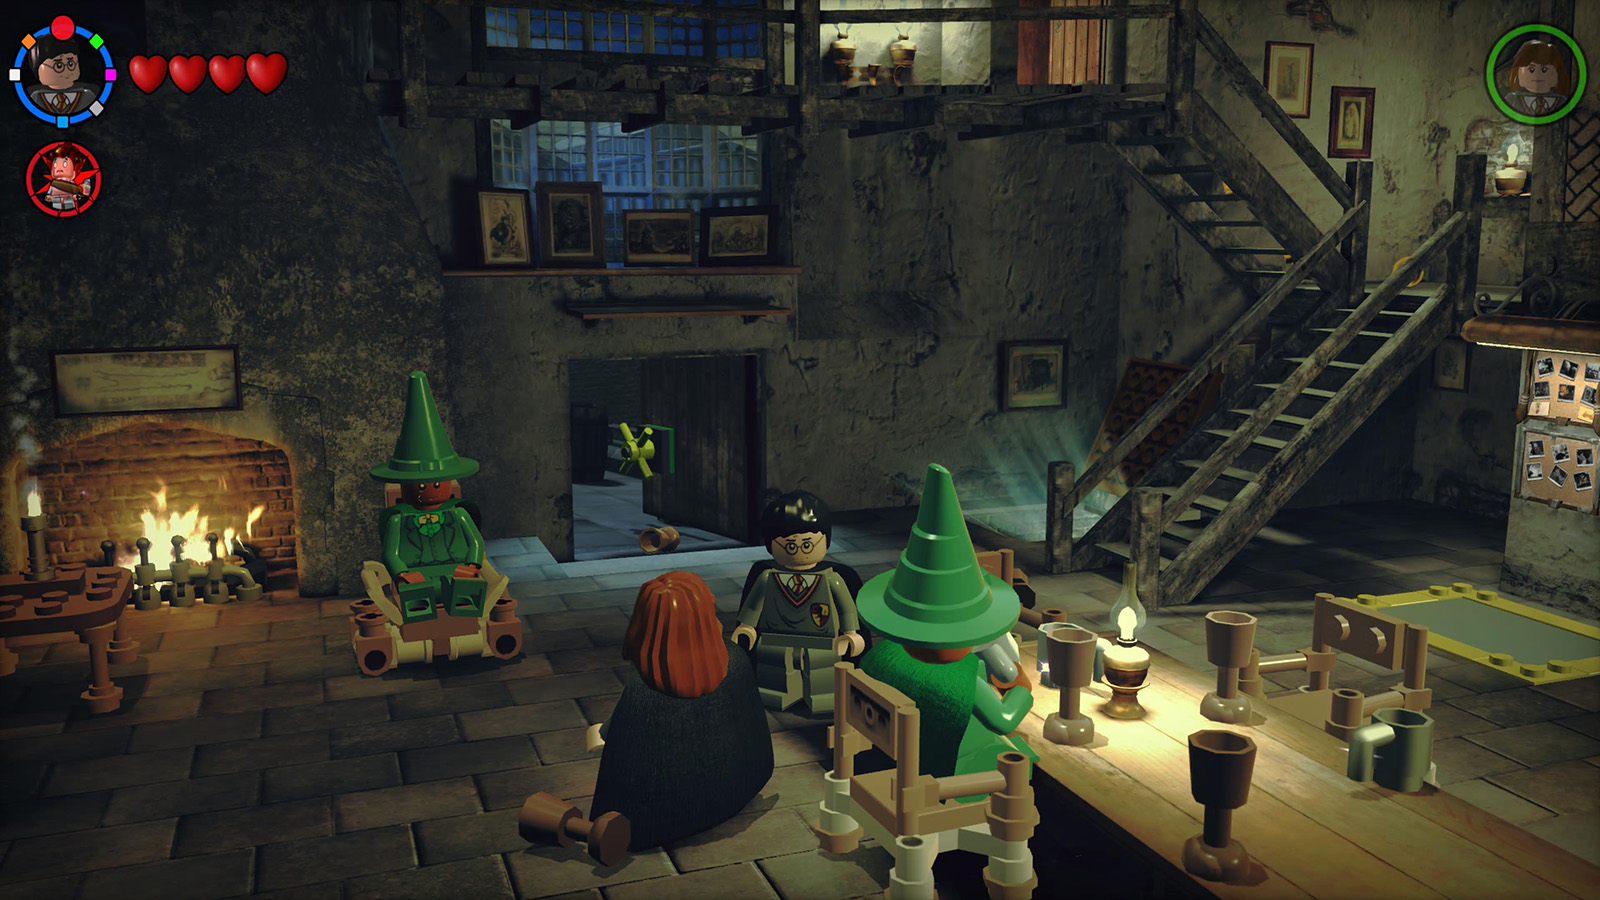 lego-harry-potter-years-1-4-free-download-latest-version-gaming-news-analyst